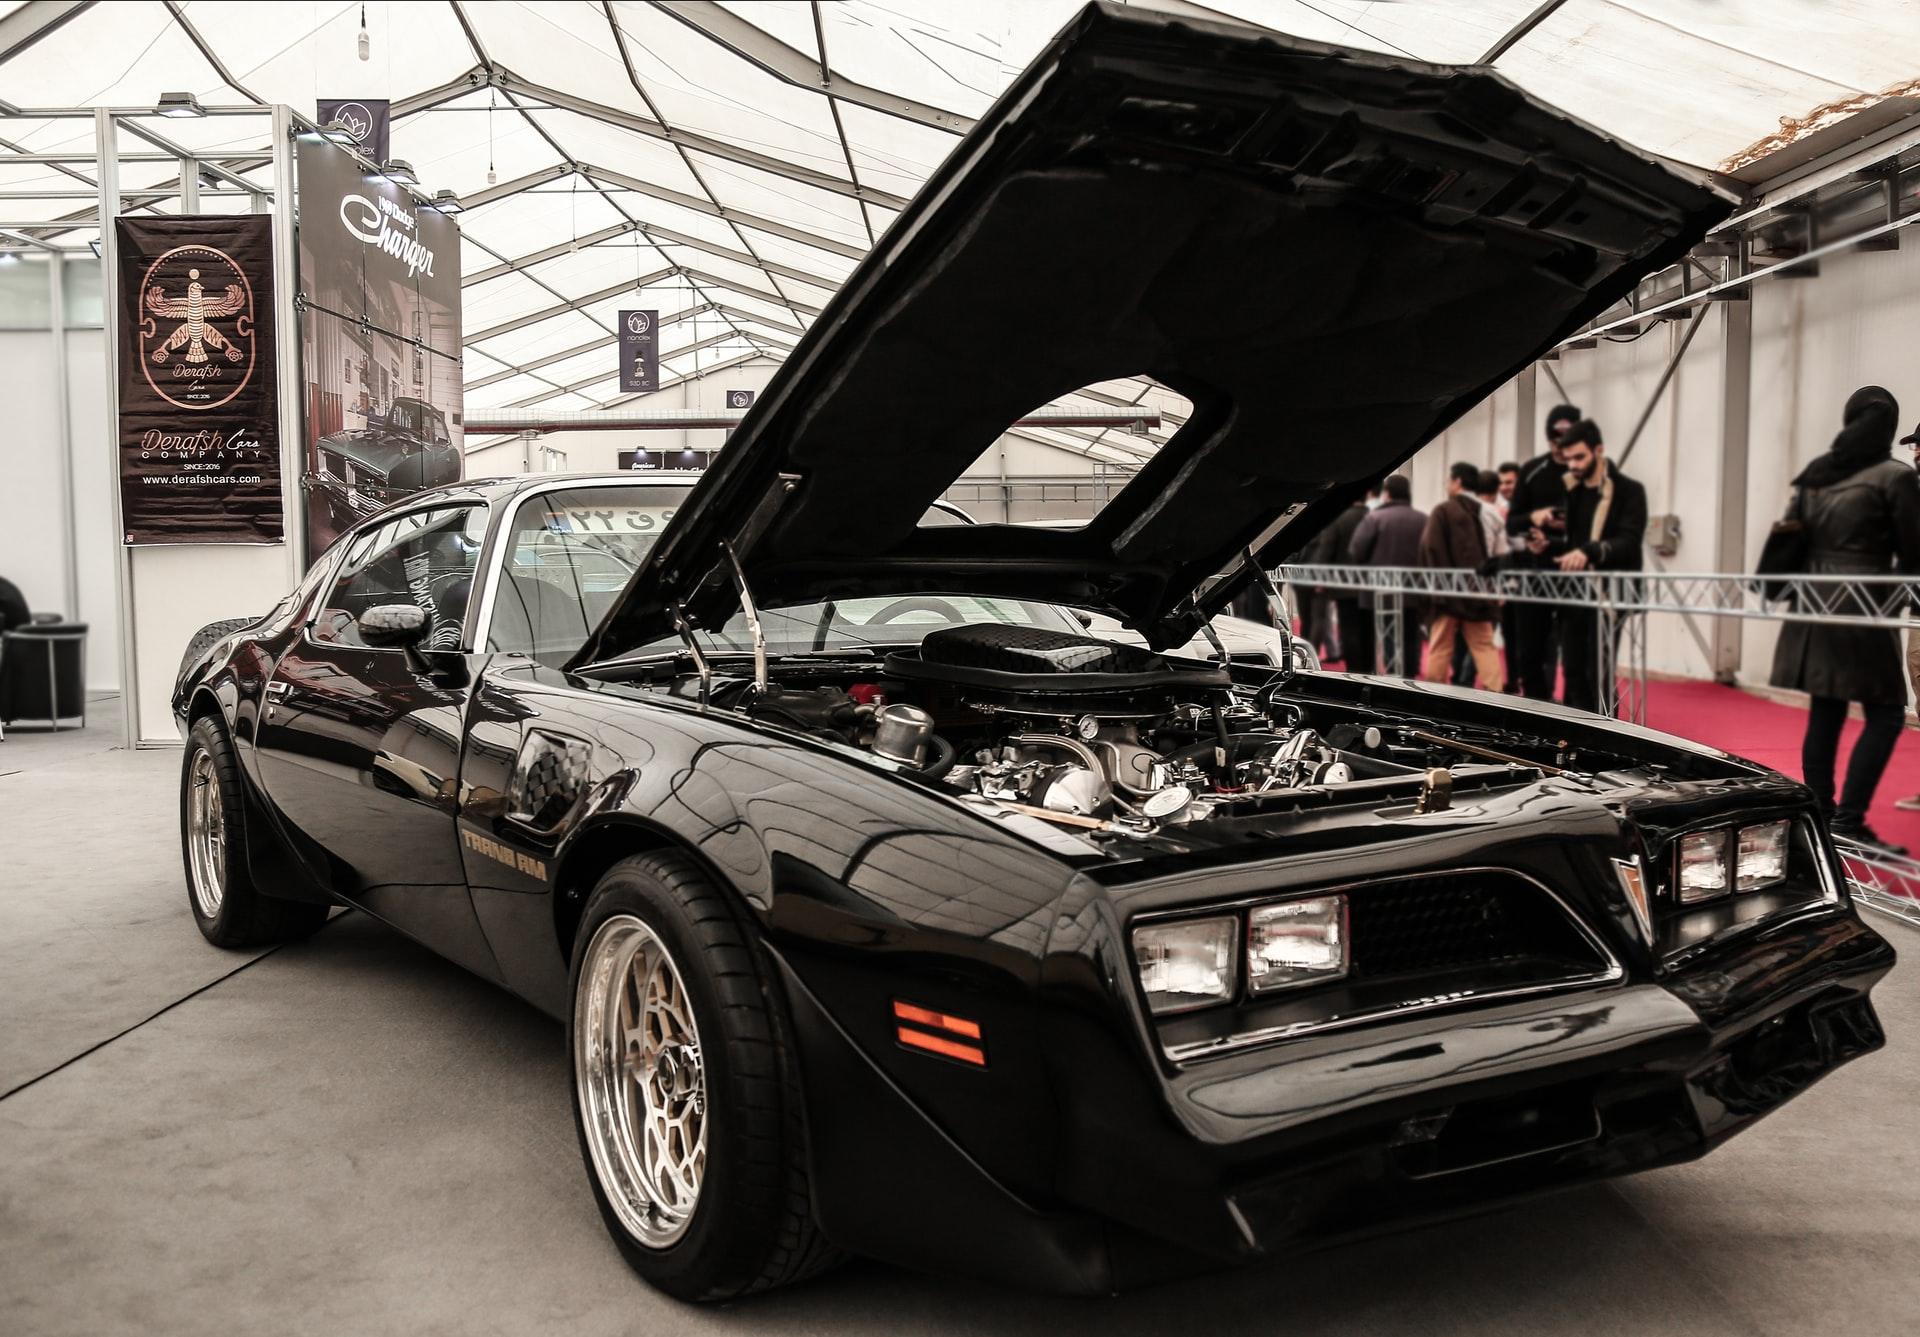 If you remember Smokey and the Bandit, you’ll love these Trans Am facts.